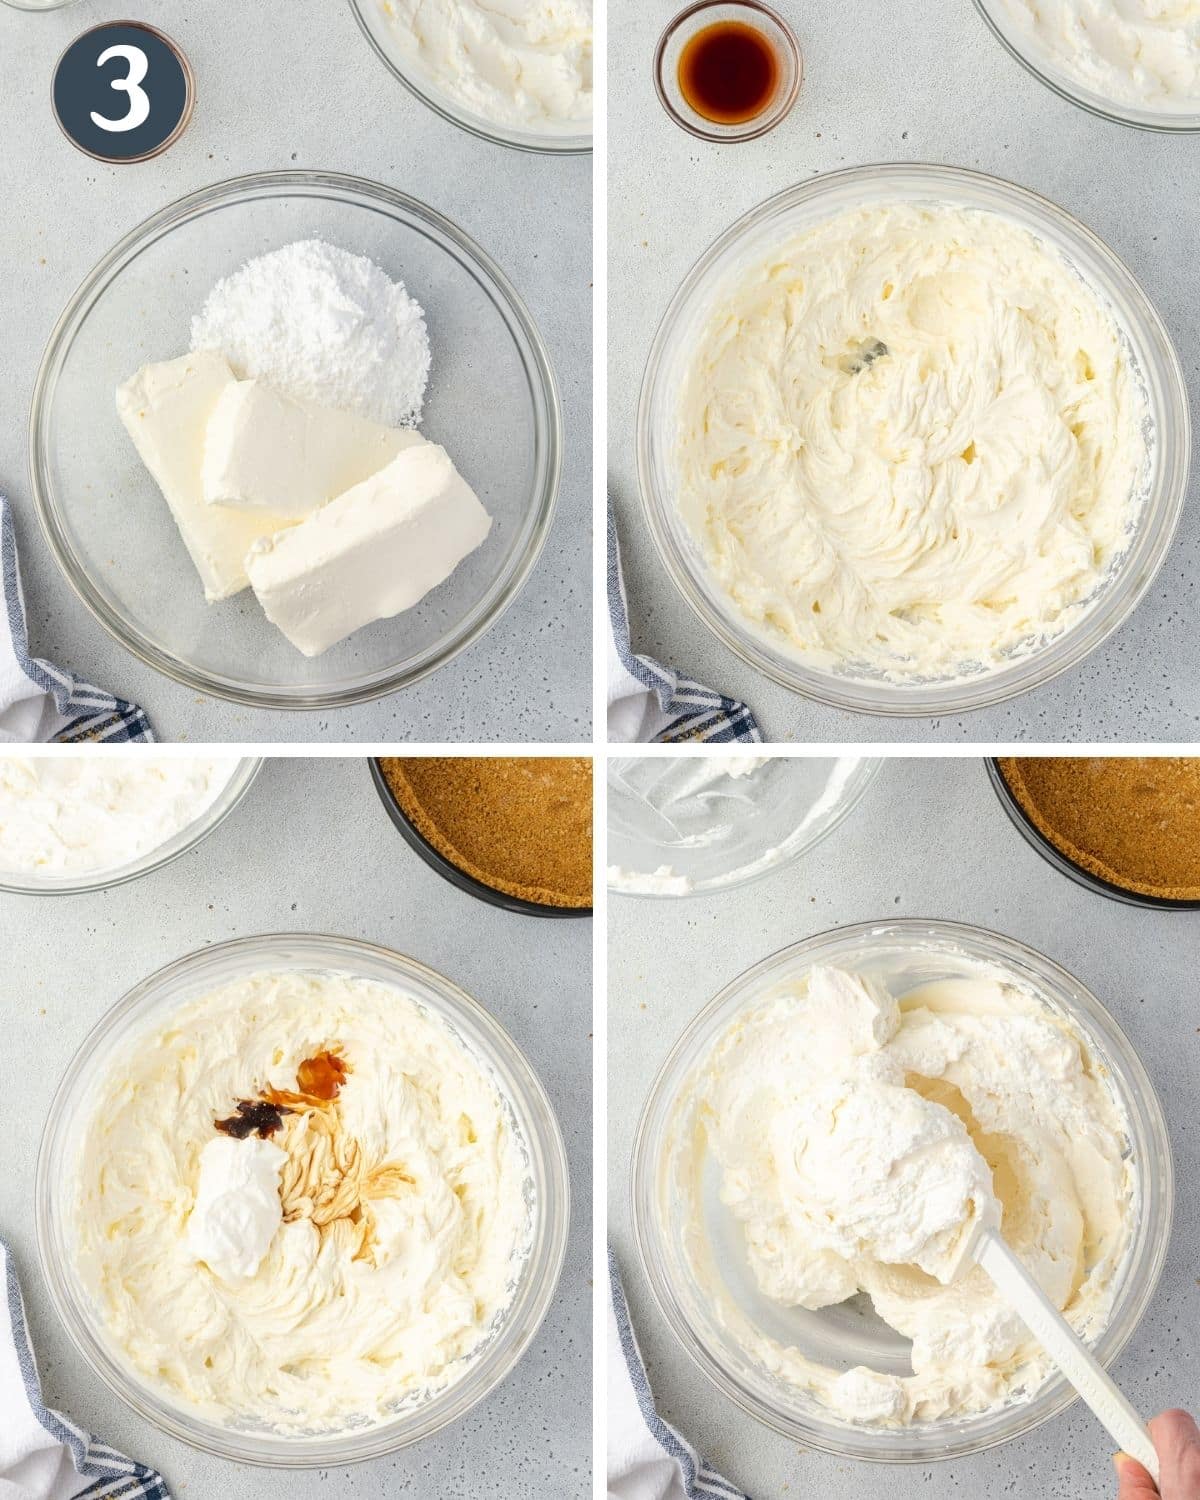 4 images showing steps to make the cheesecake filling.